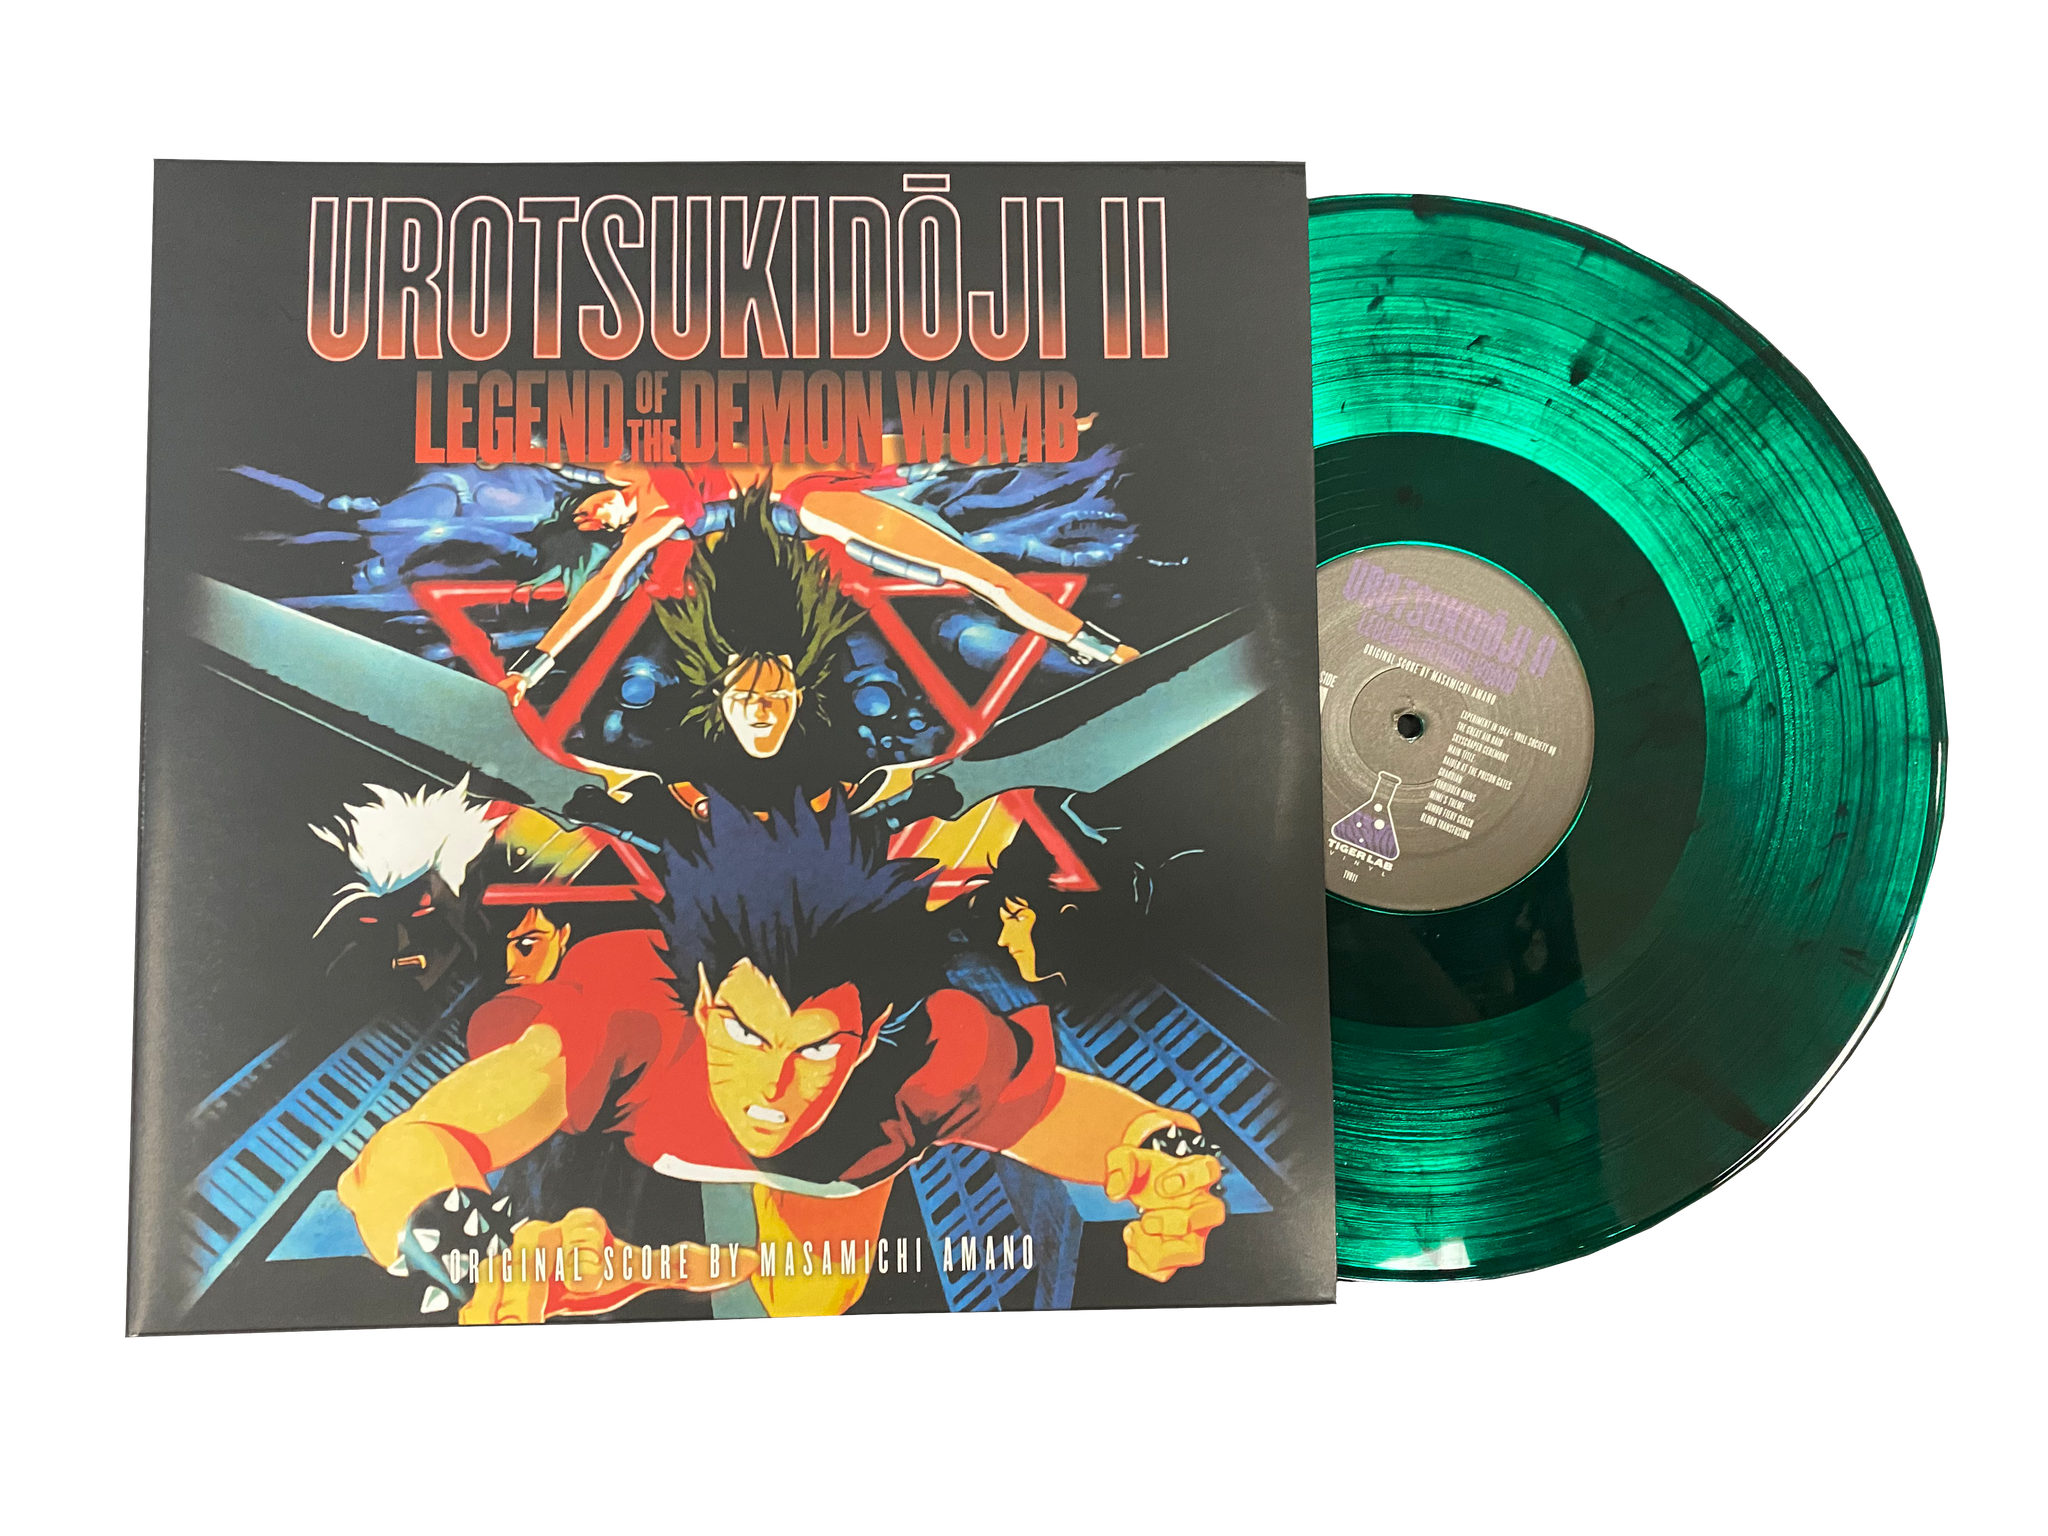 UROTSUKIDOJI: "LEGEND OF THE DEMON WOMB" LIMITED EDITION COLORED VINYL 2XLP